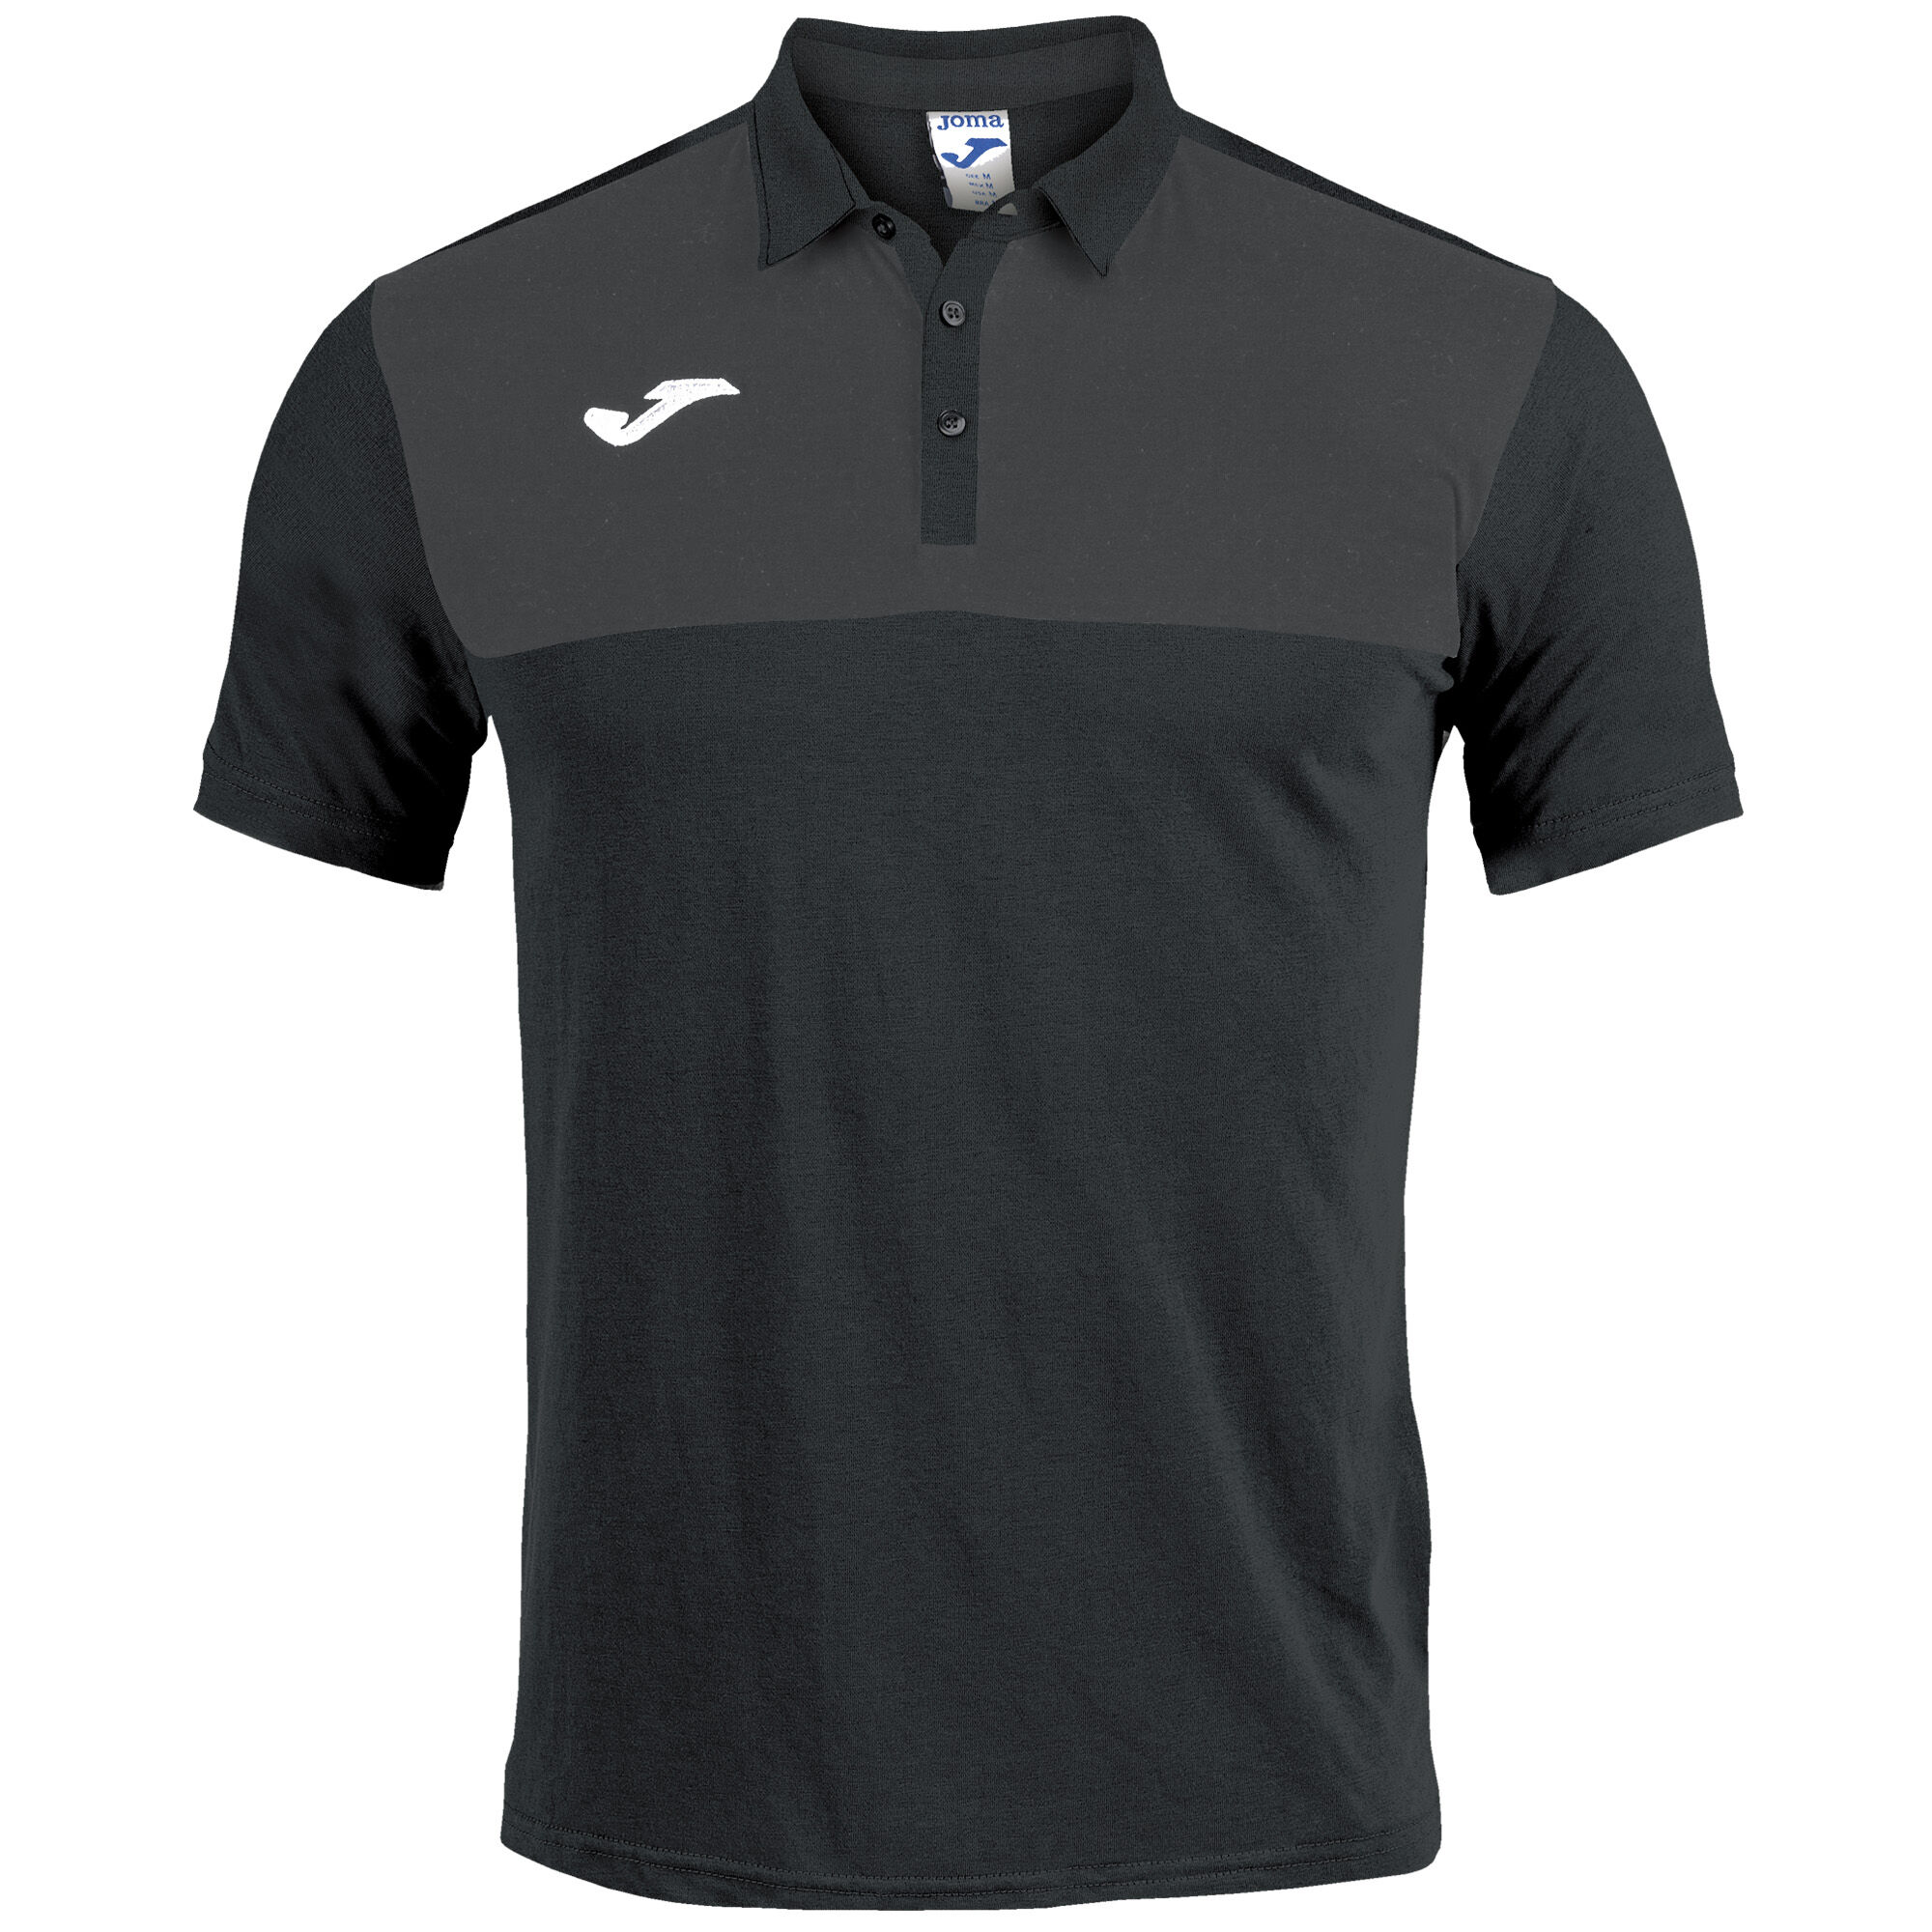 Polo manches courtes homme Winner noir anthracite